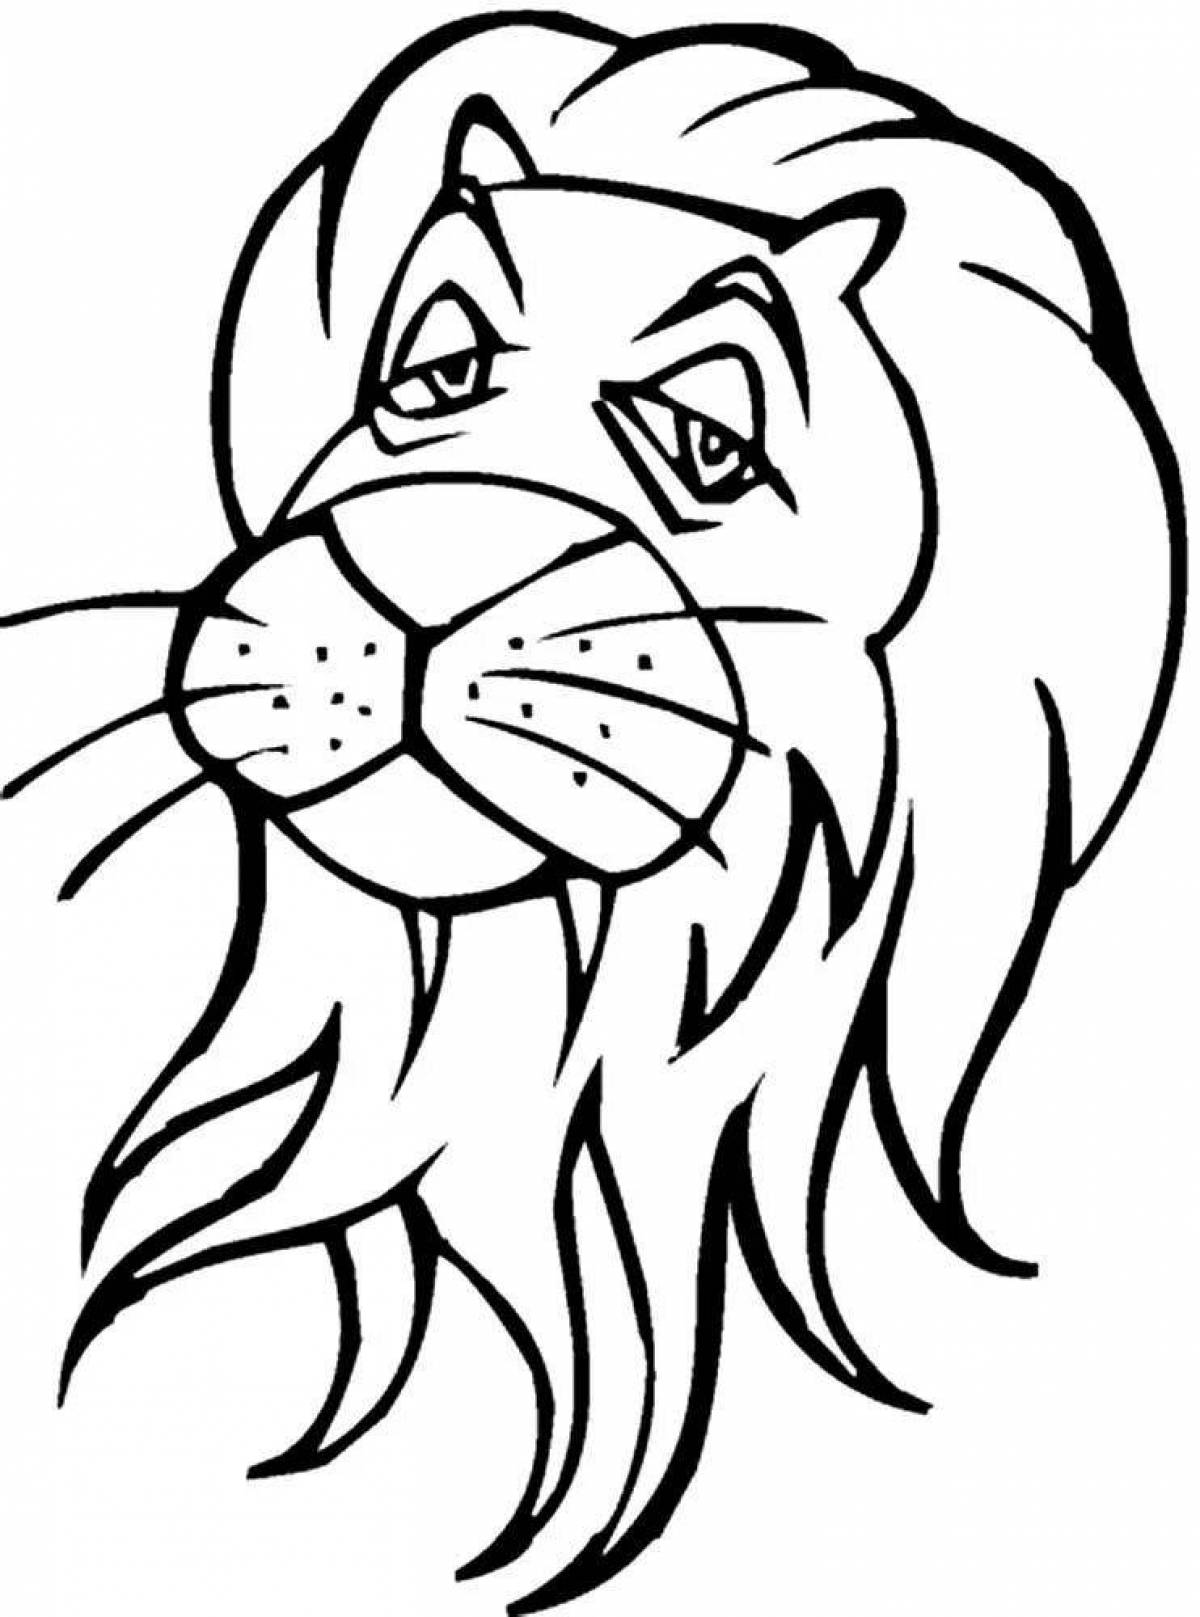 Brightly colored lion head coloring page